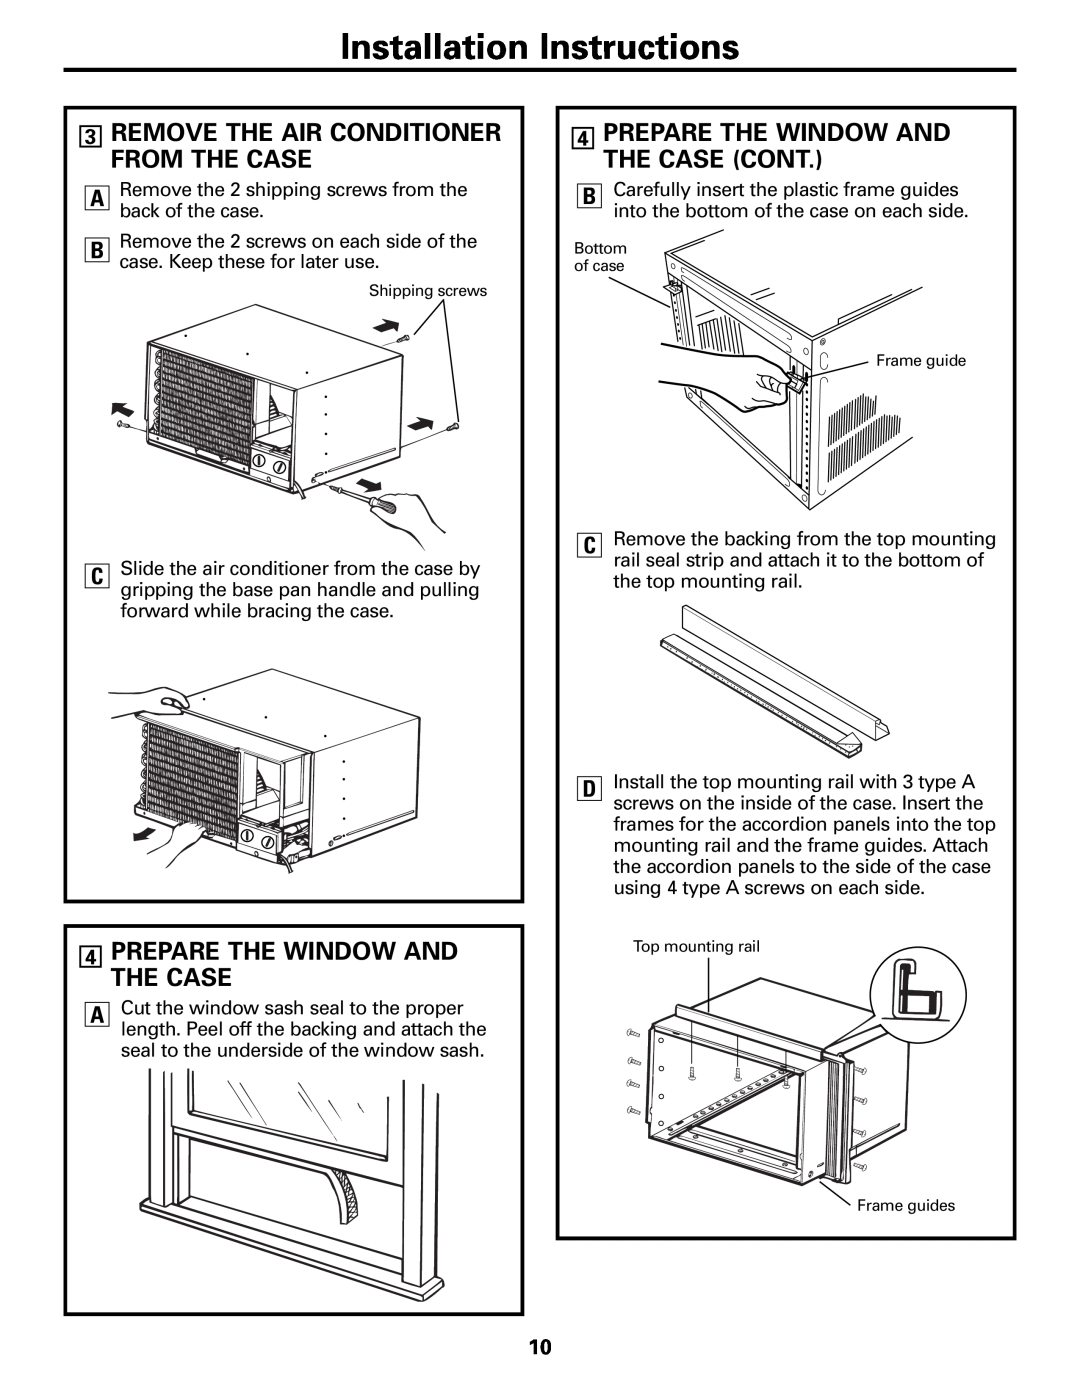 GE AGE07 3REMOVE THE AIR CONDITIONER FROM THE CASE, 4PREPARE THE WINDOW AND THE CASE, Installation Instructions 